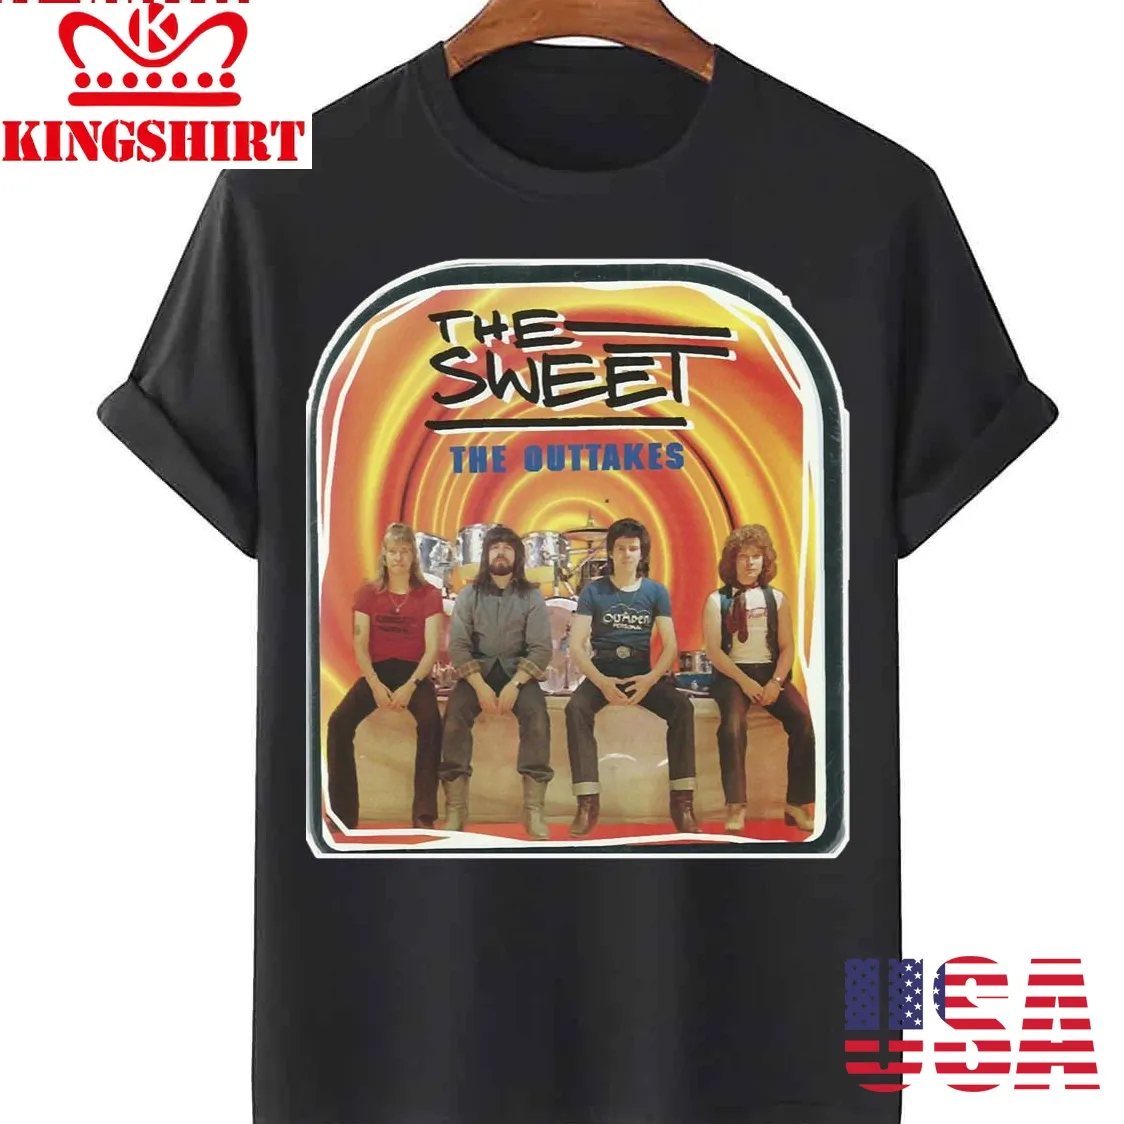 Secret The Sweet Band Portrait With Sweet And Cute Unisex T Shirt